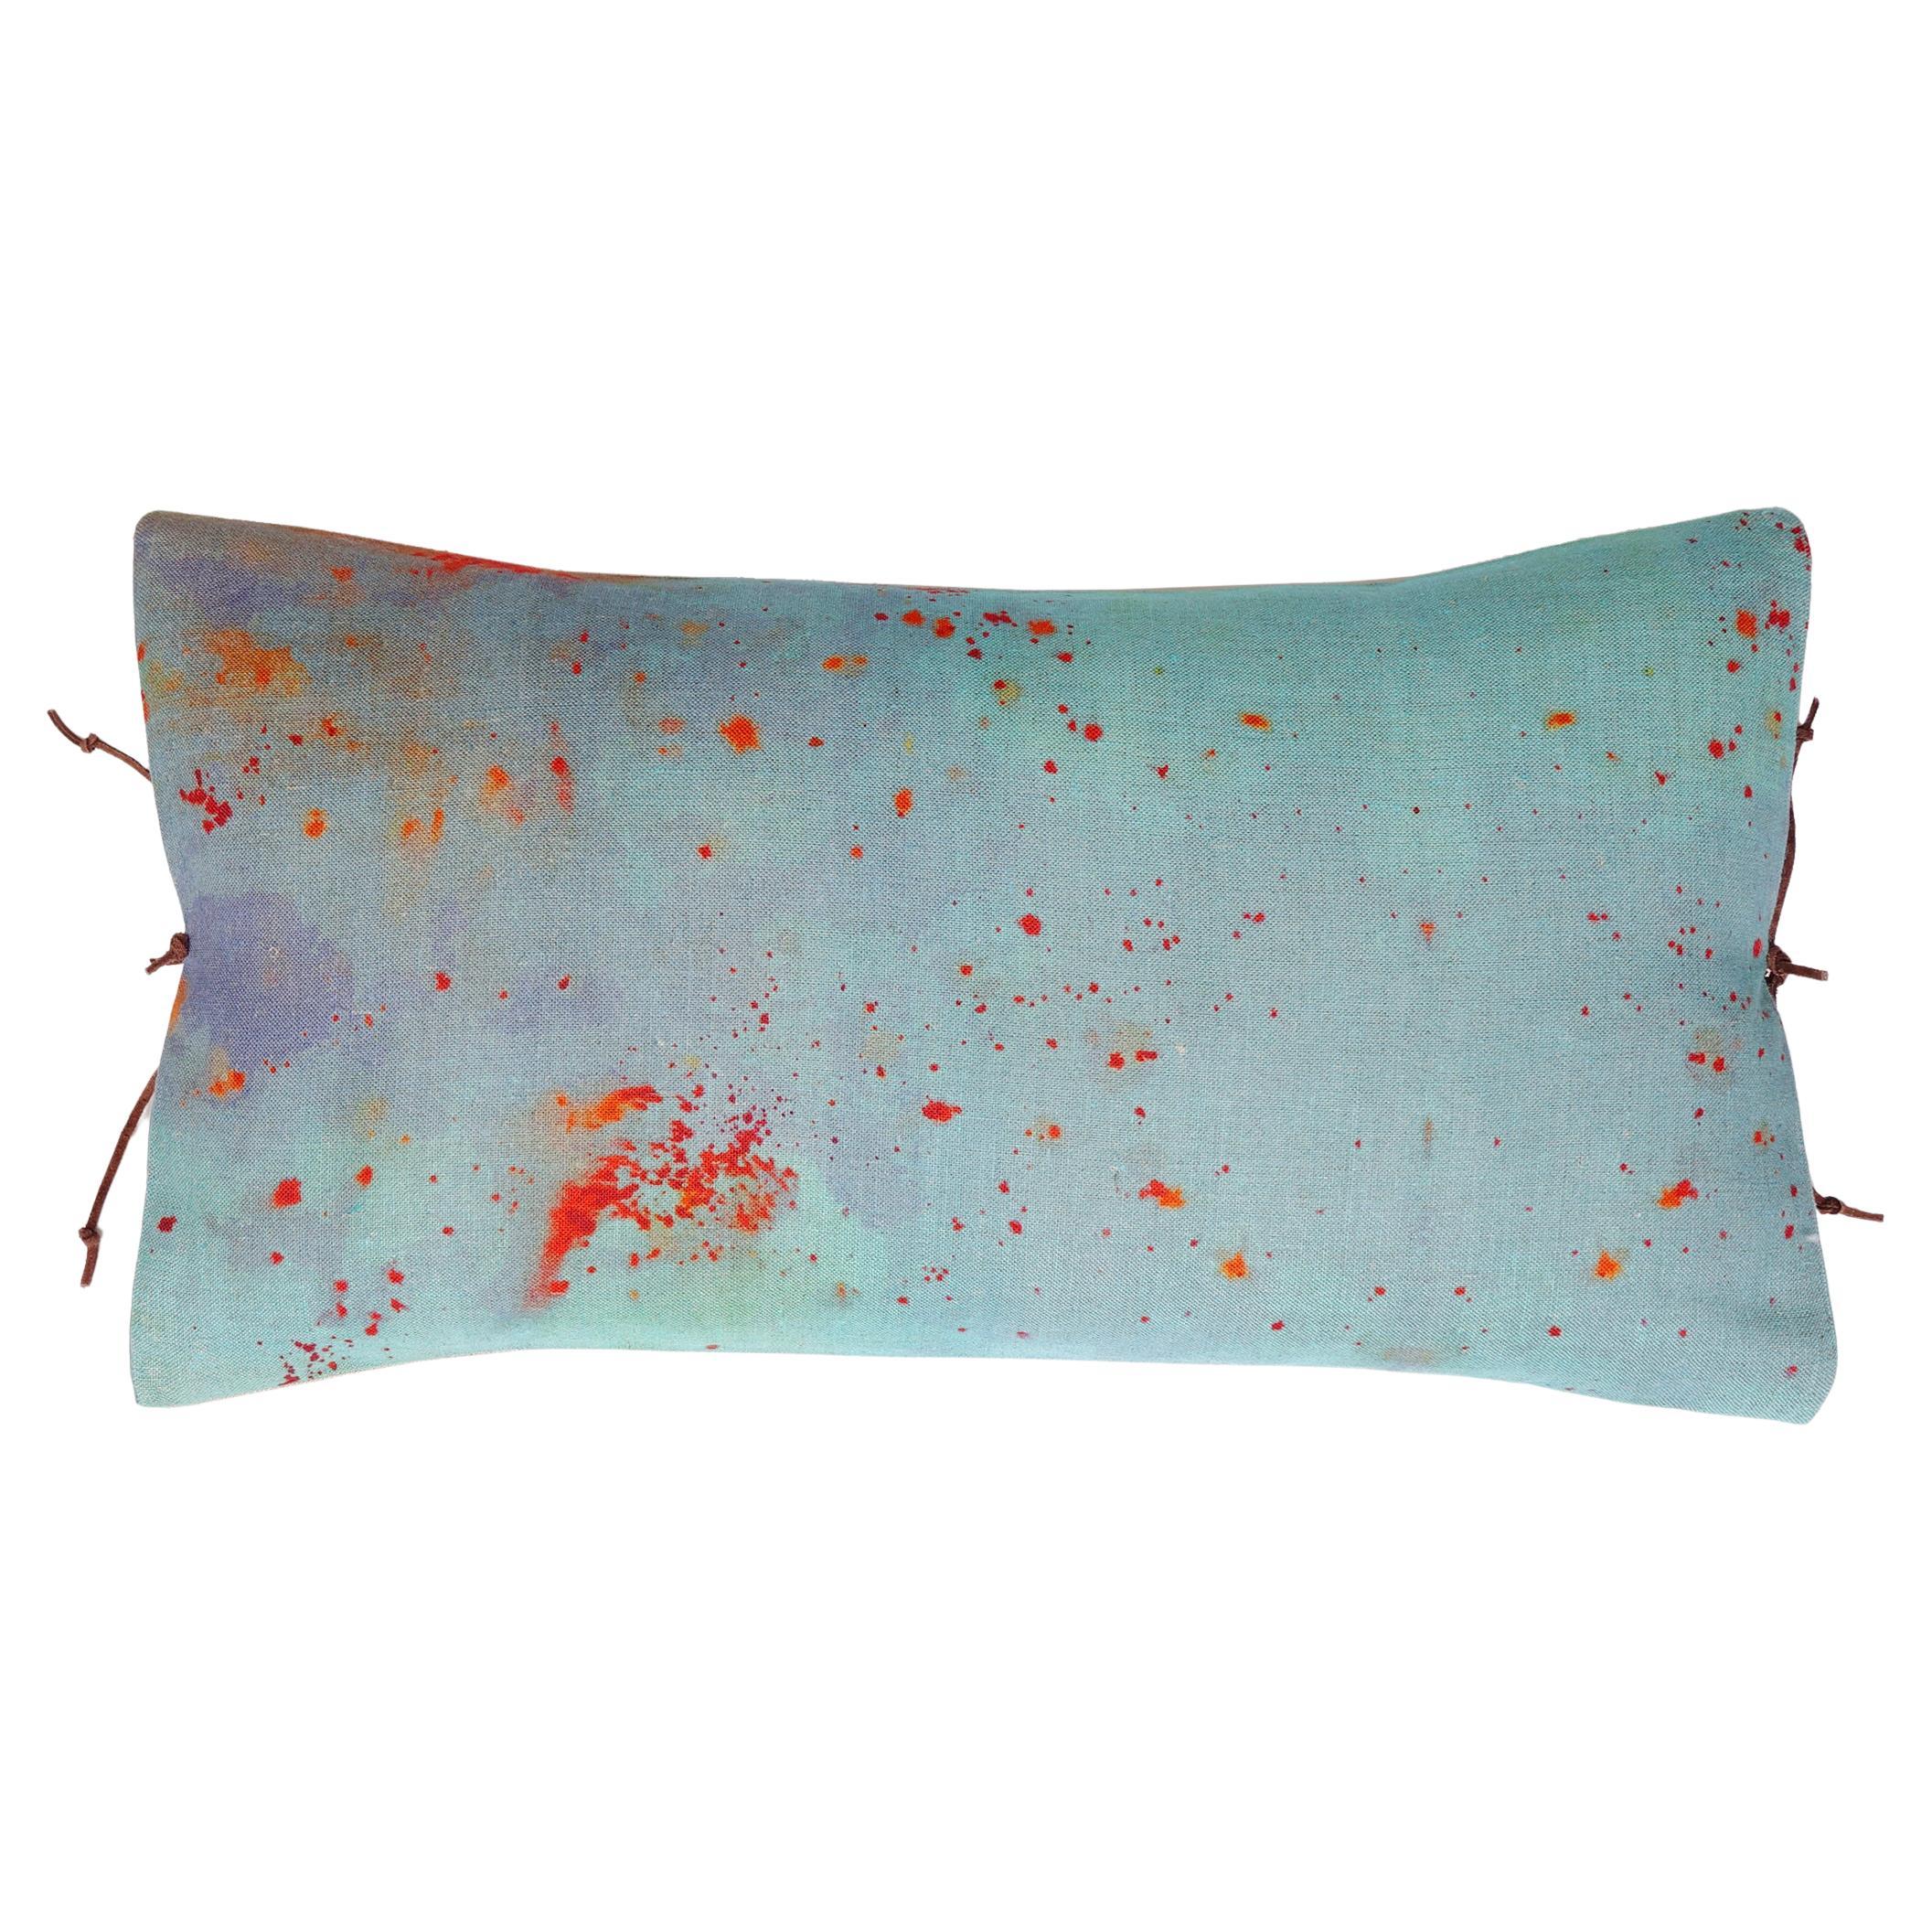 Printed Linen Pillow Cloudy Sapphire For Sale